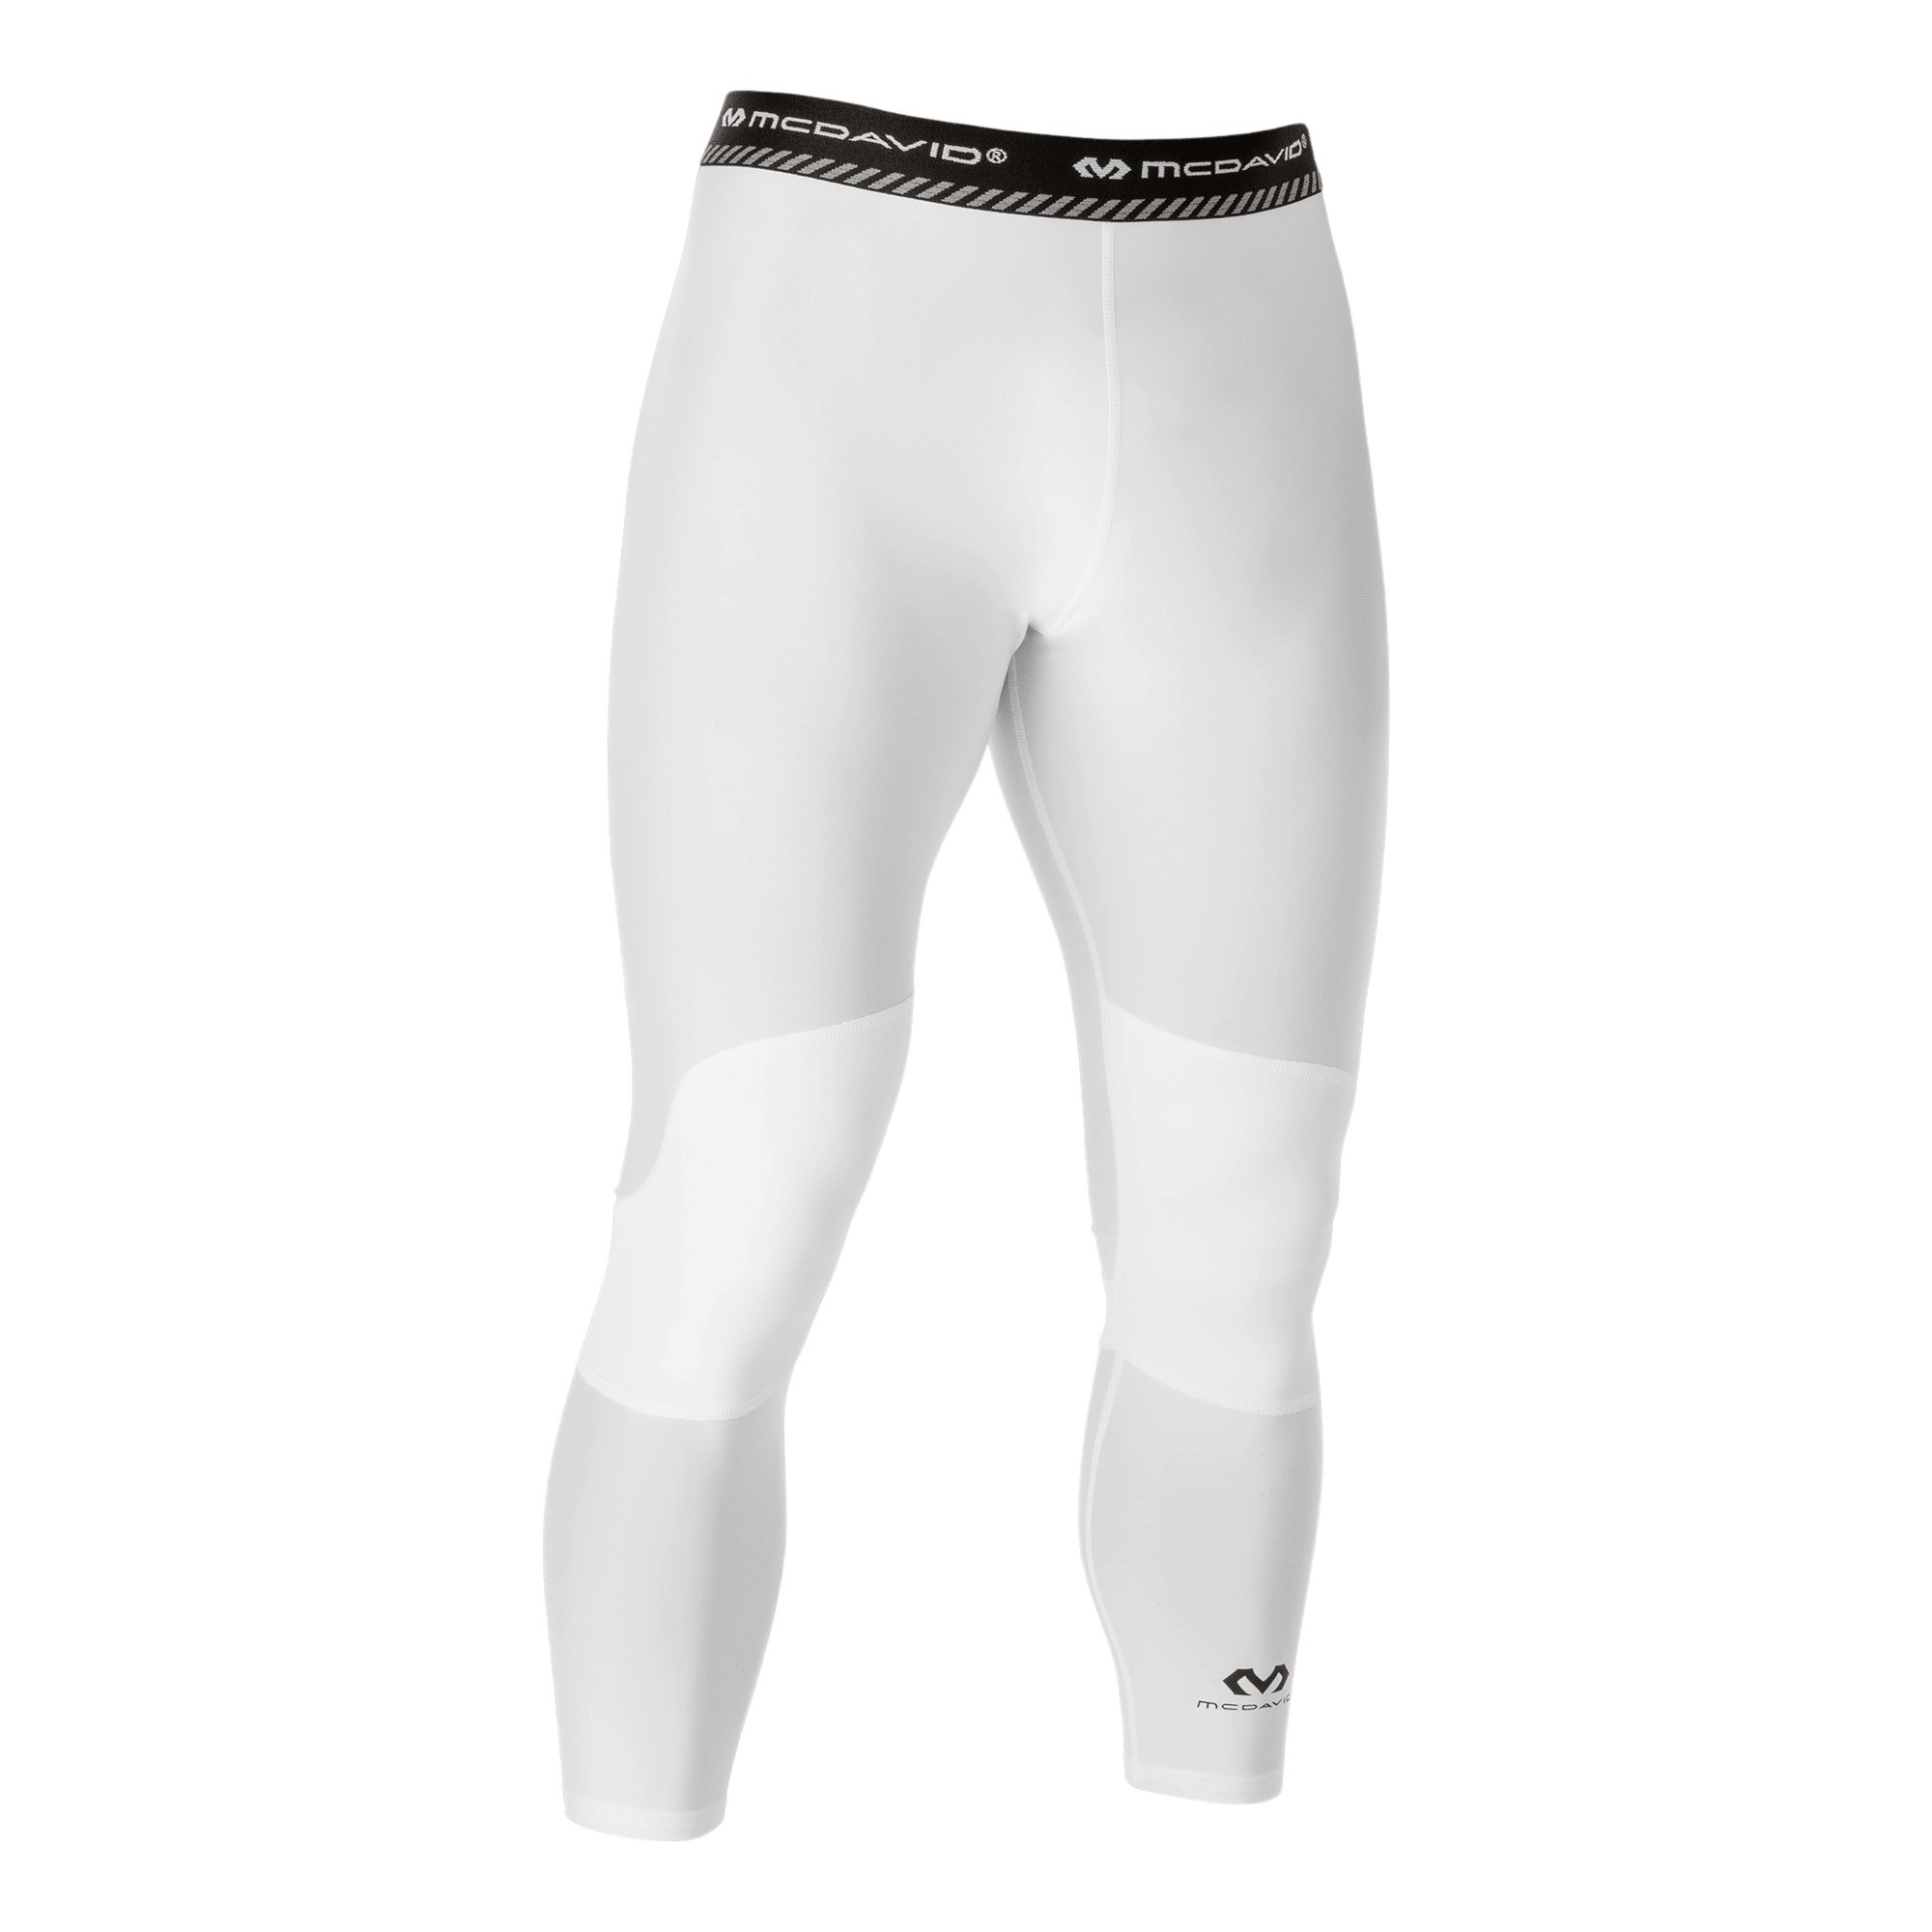 Legging 3/4 compression with double-layer knee support McDavid